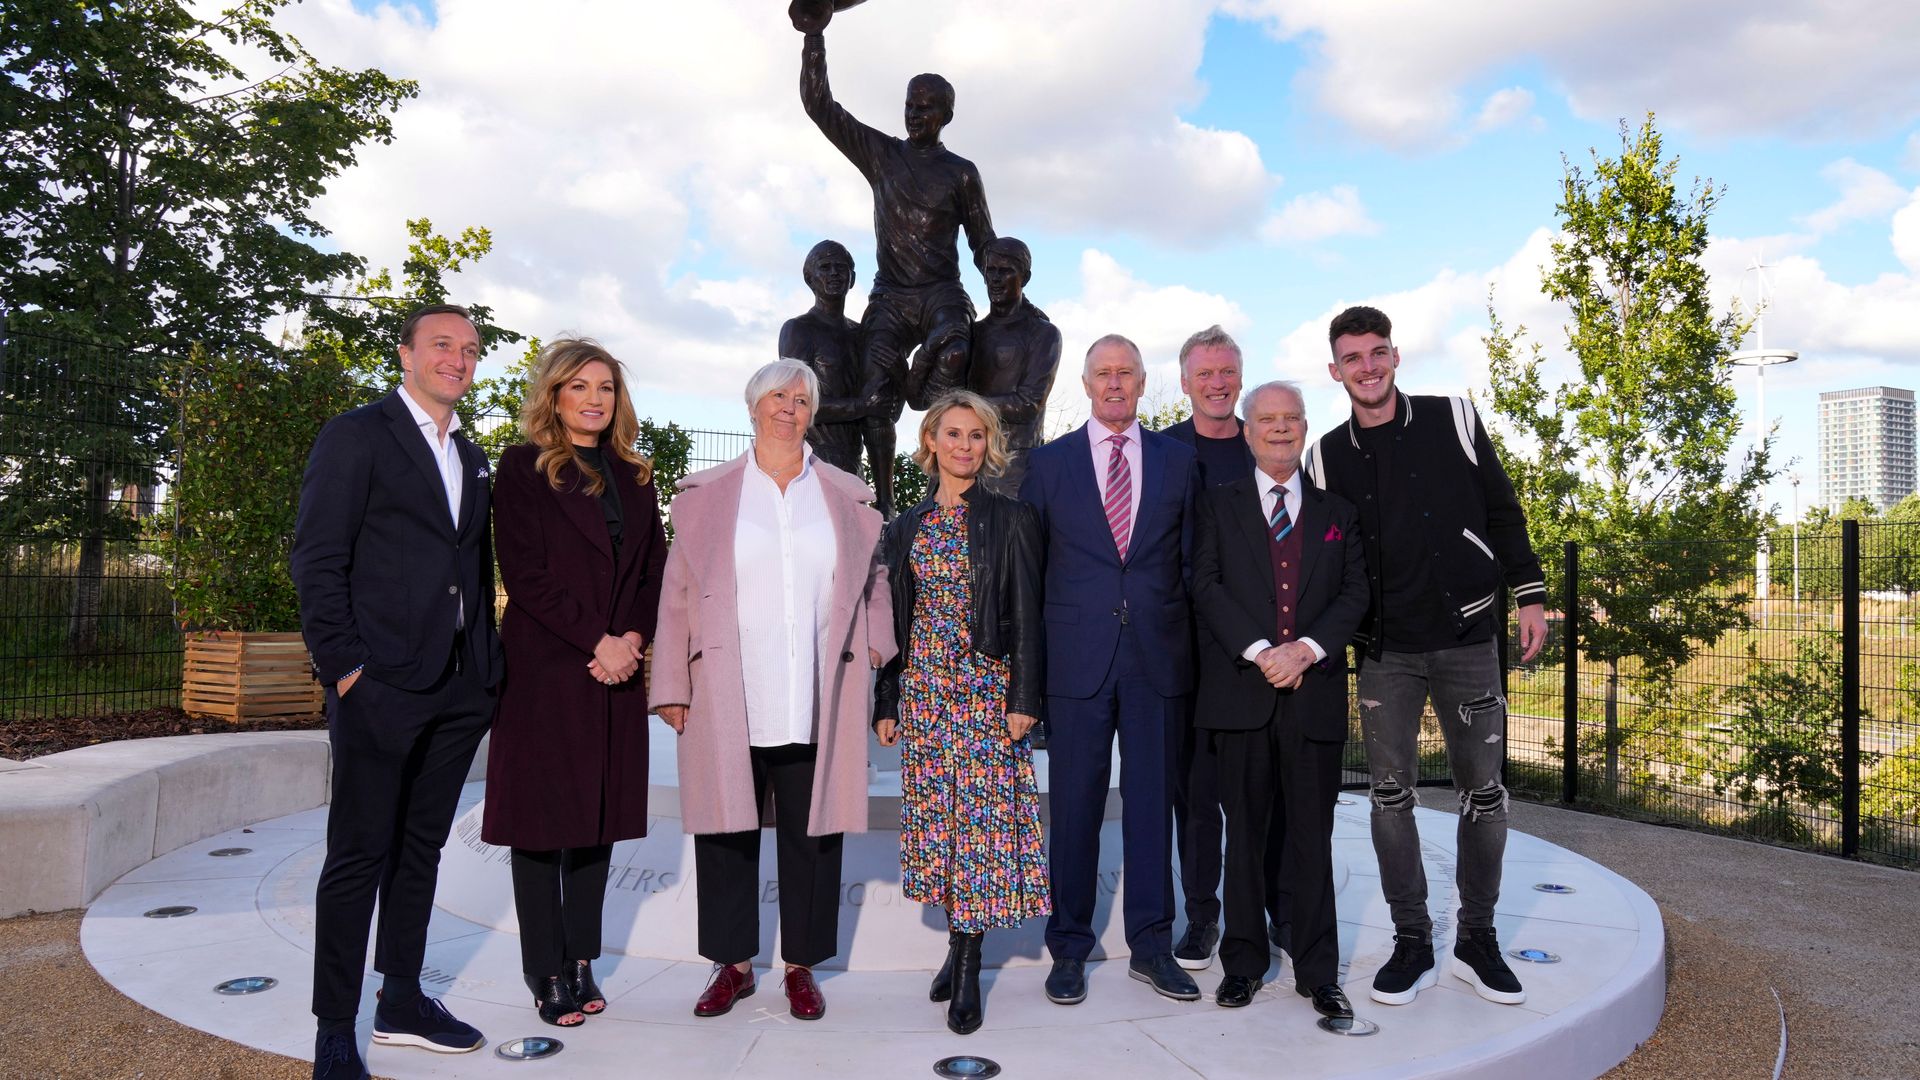 West Ham unveil statue paying tribute to Moore, Hurst and Peters